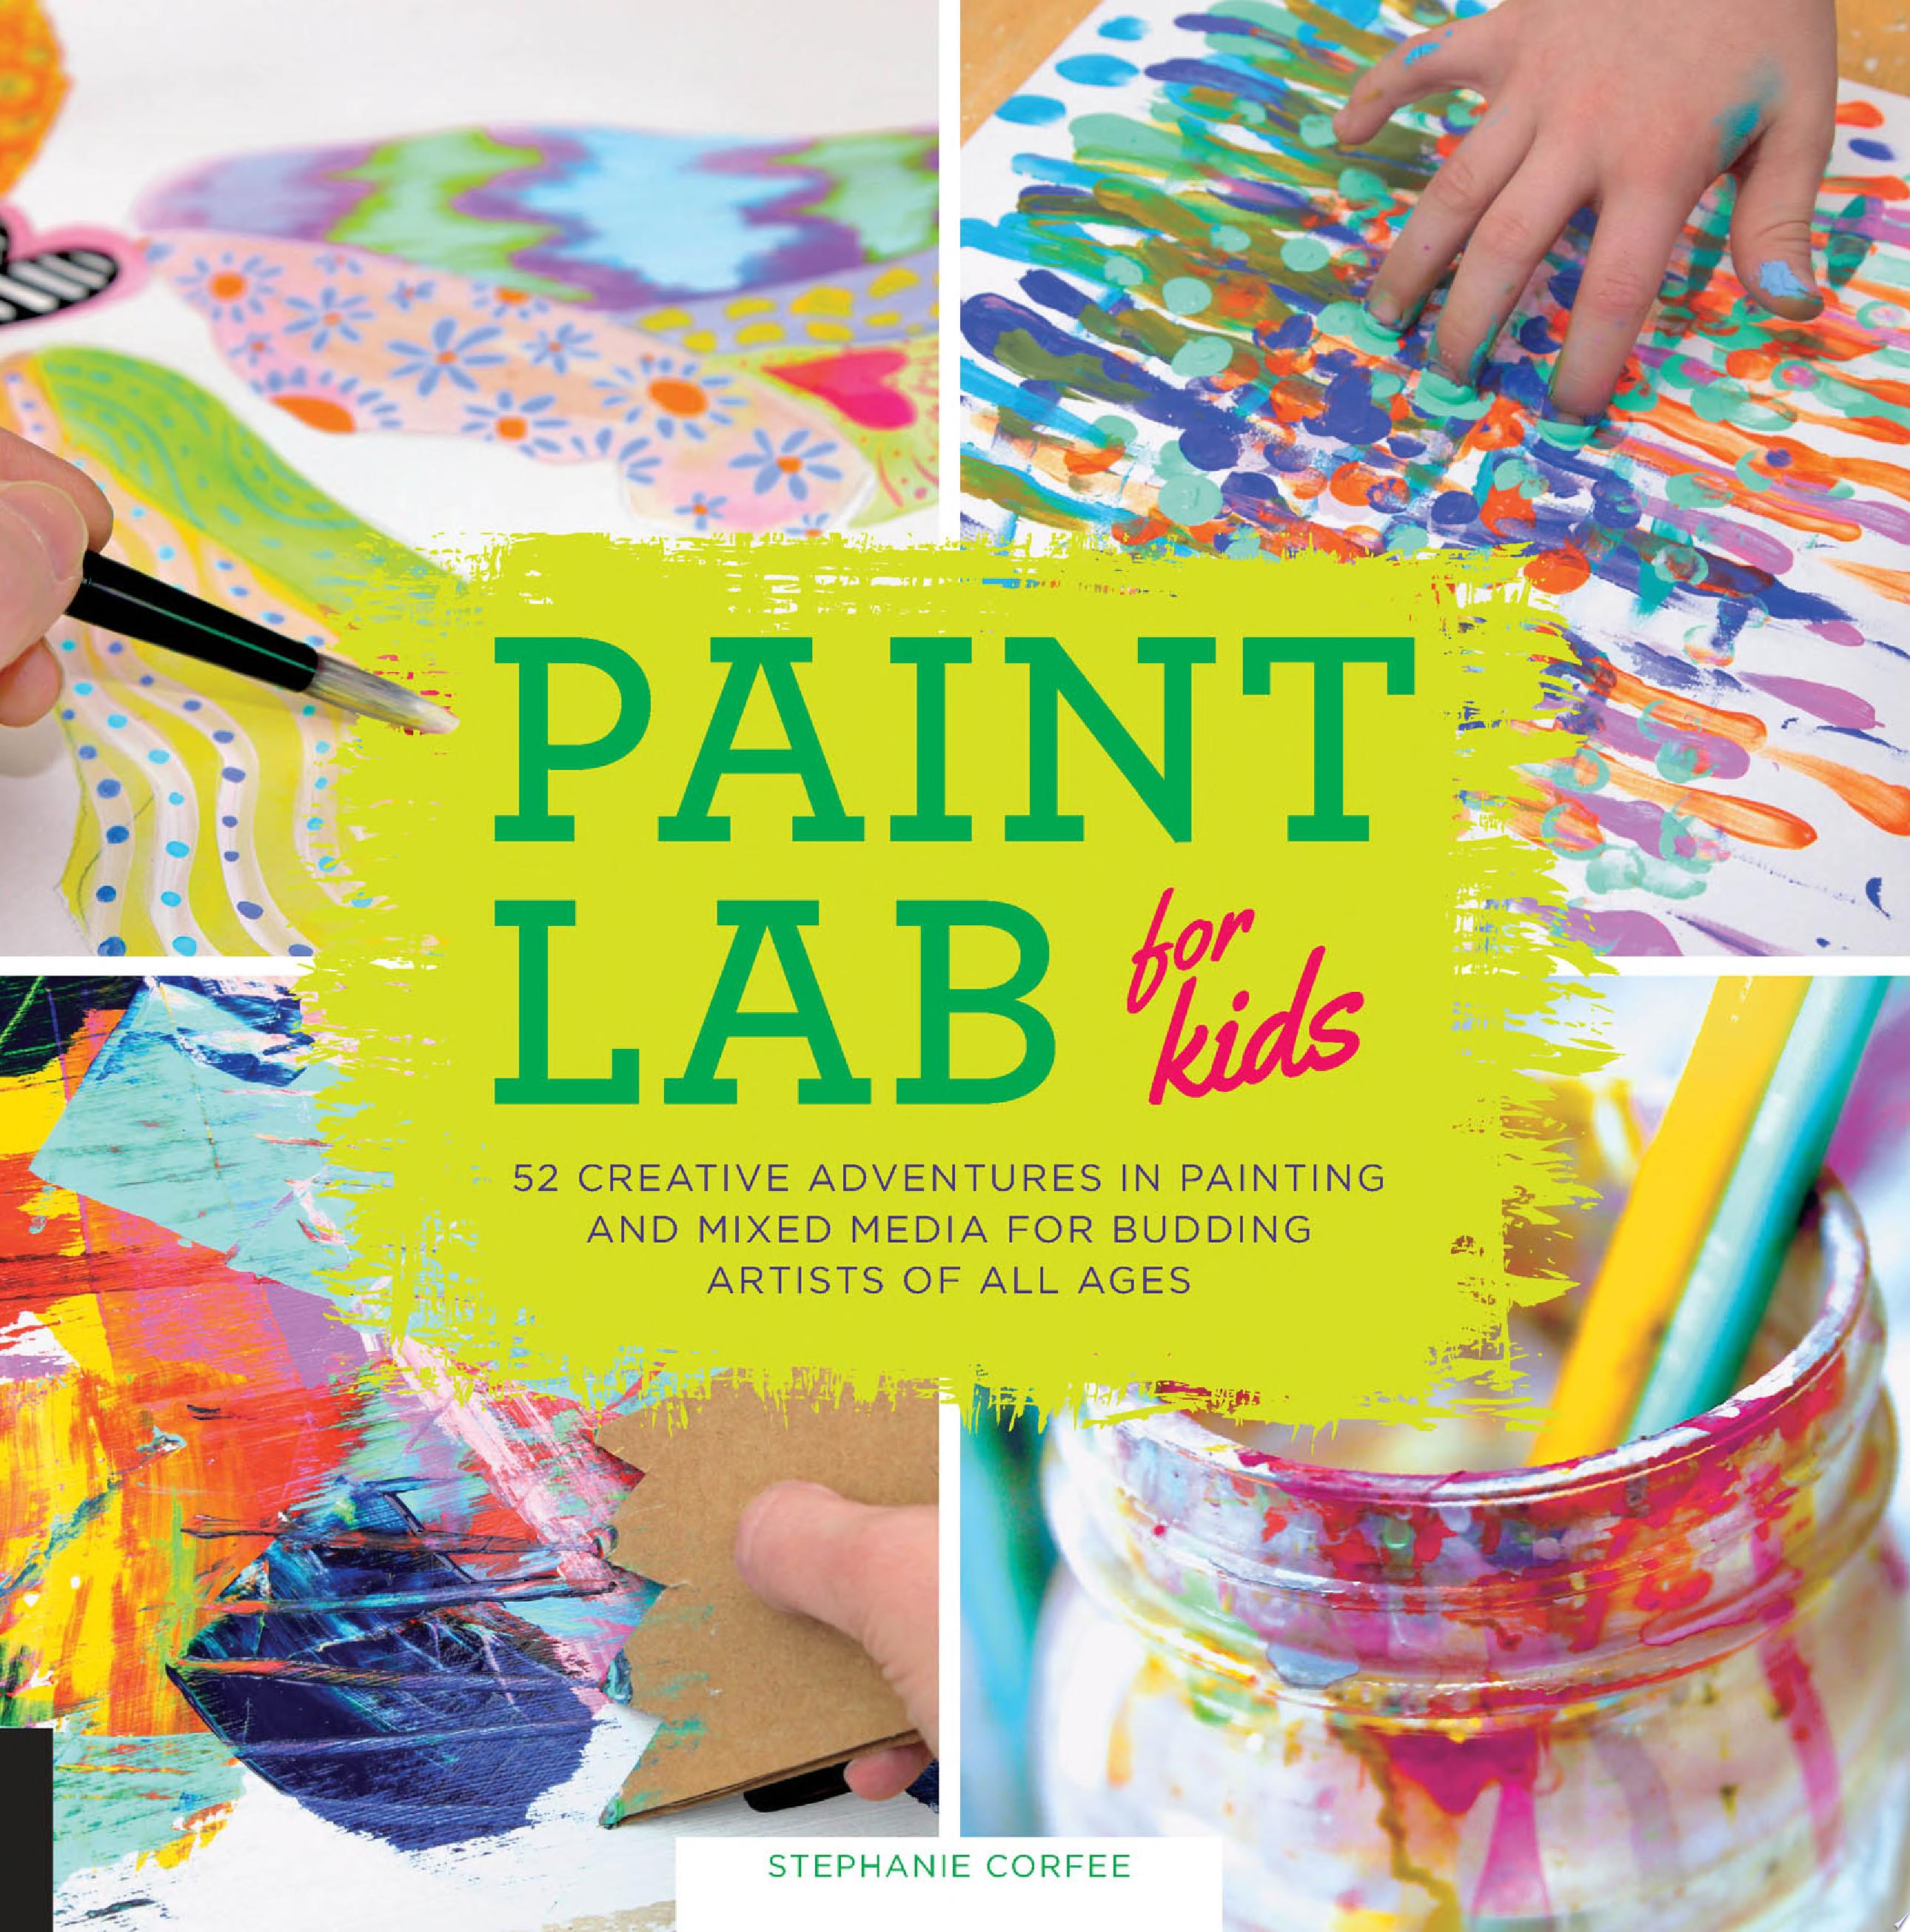 Image for "Paint Lab for Kids"